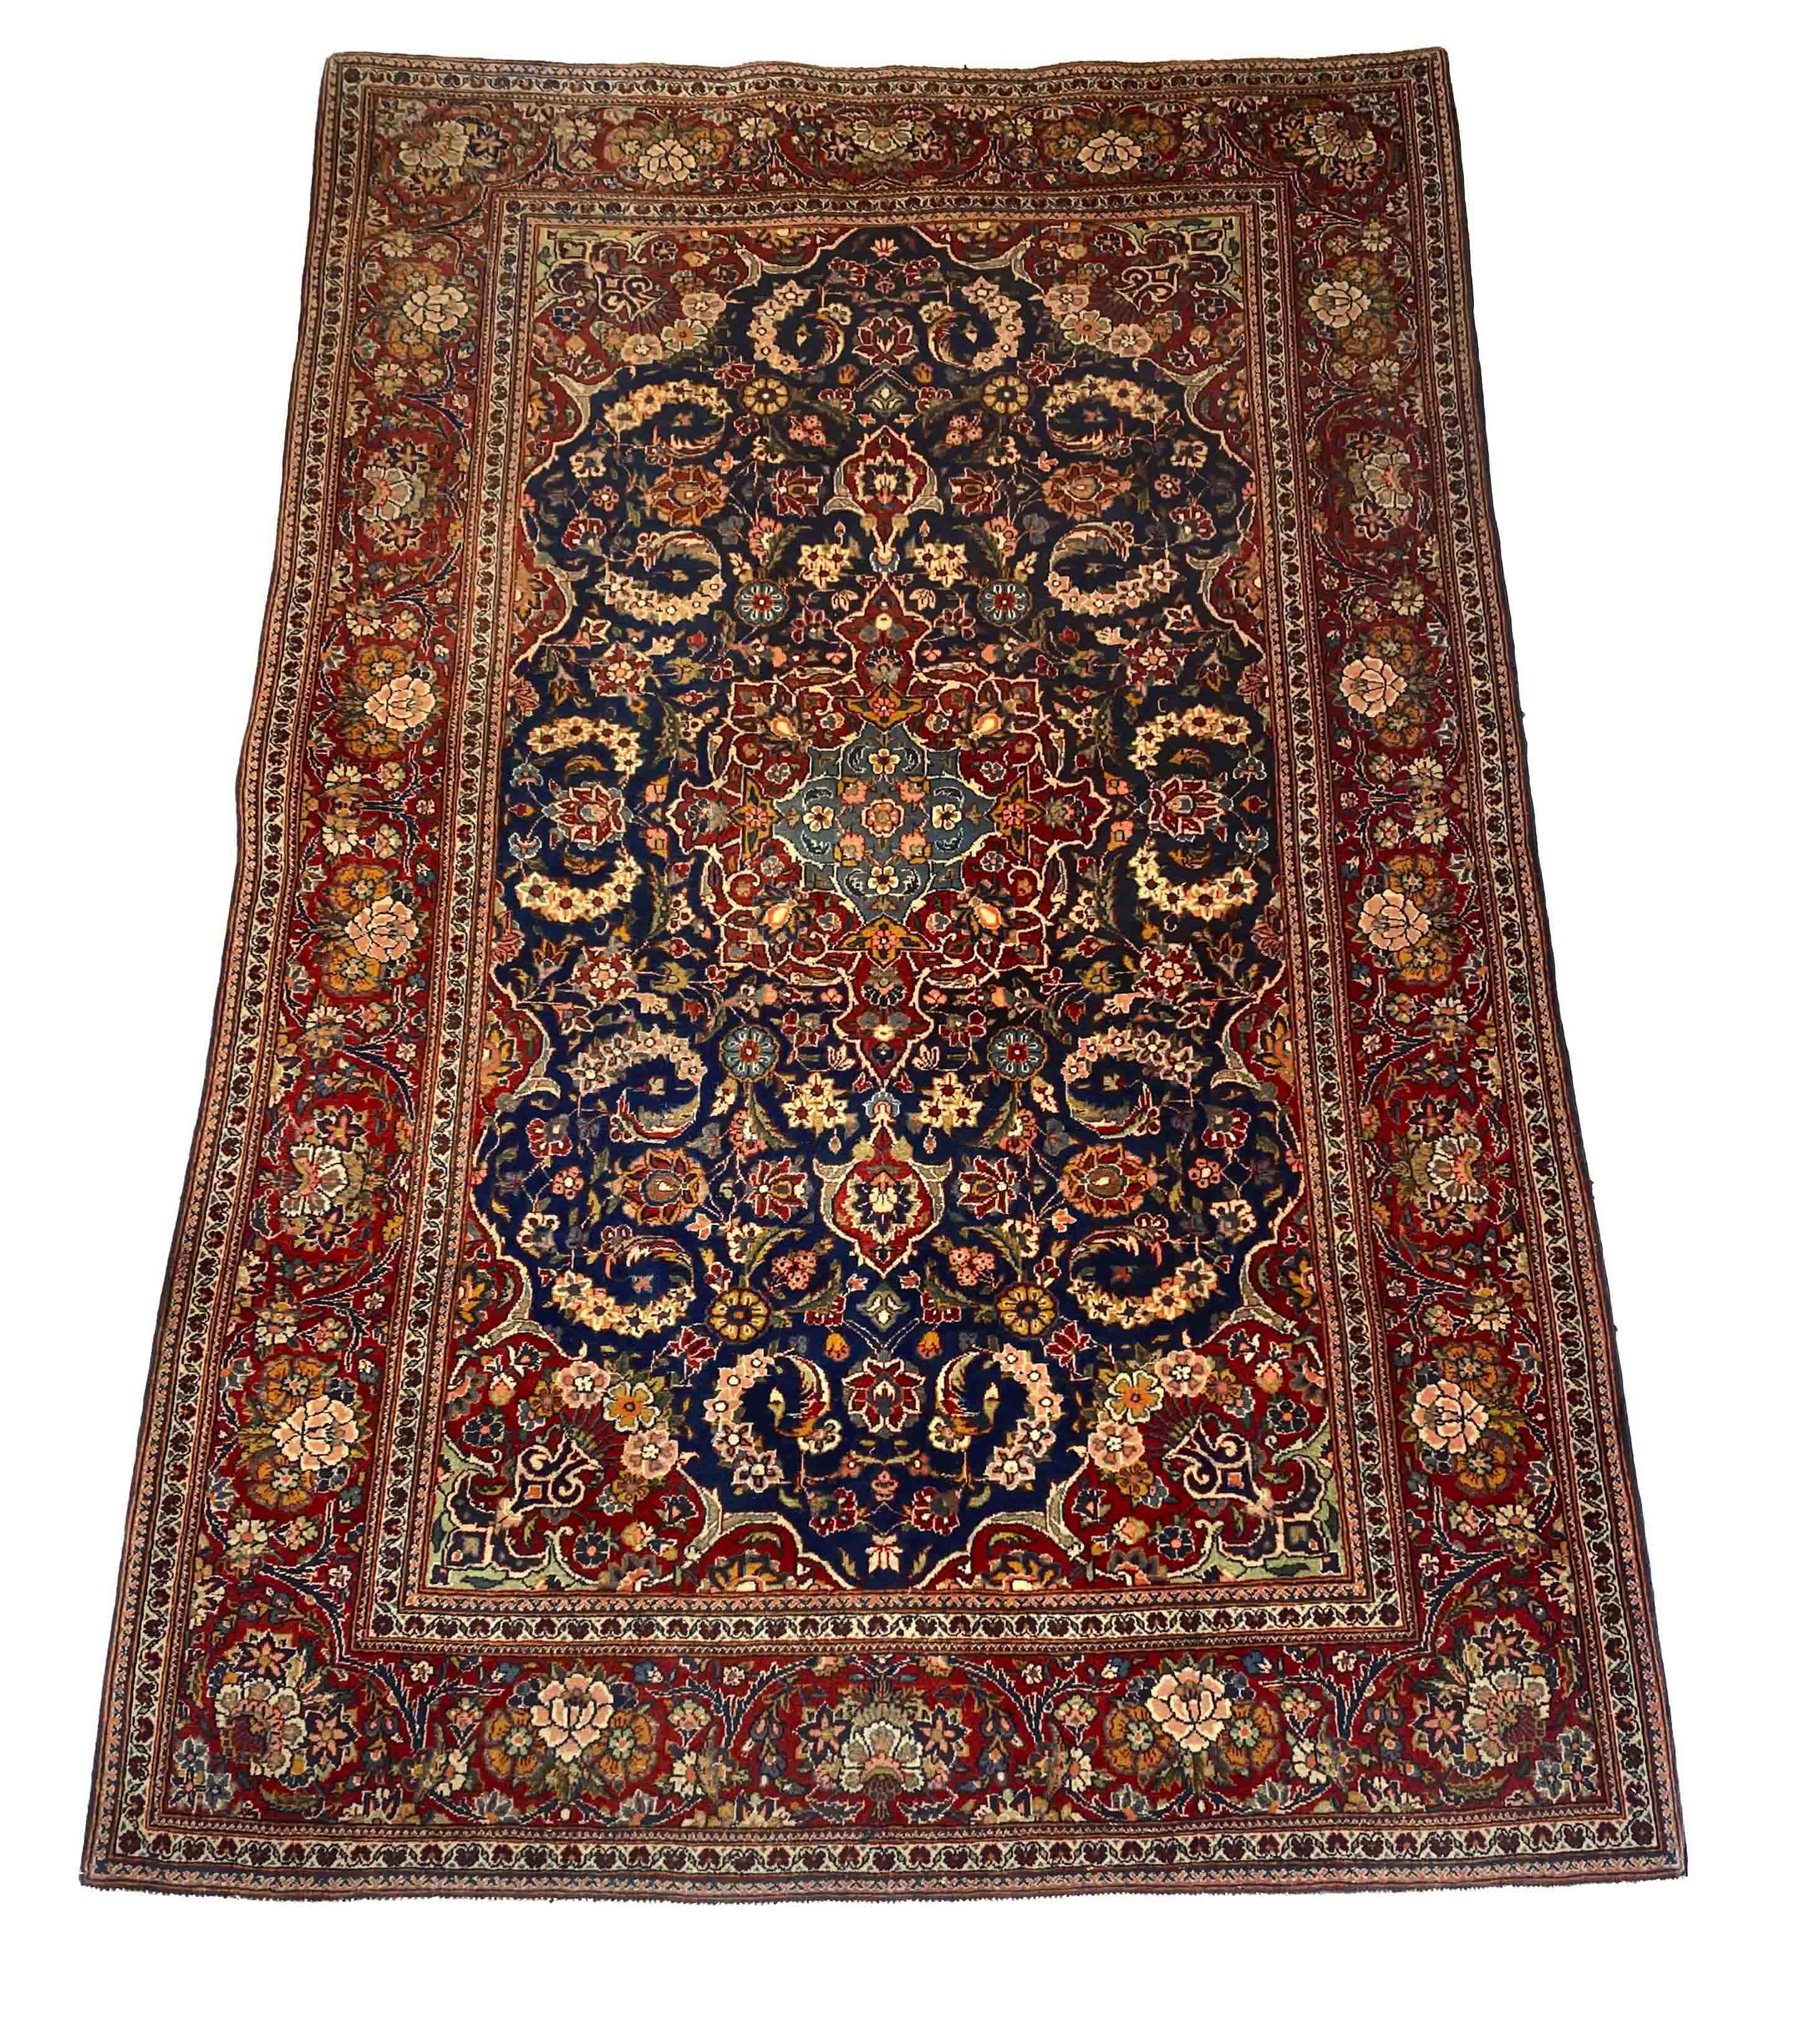 Carpet, Keshan, good condition with minor wear, 204 x 133 cm - The carpet can only be viewed and